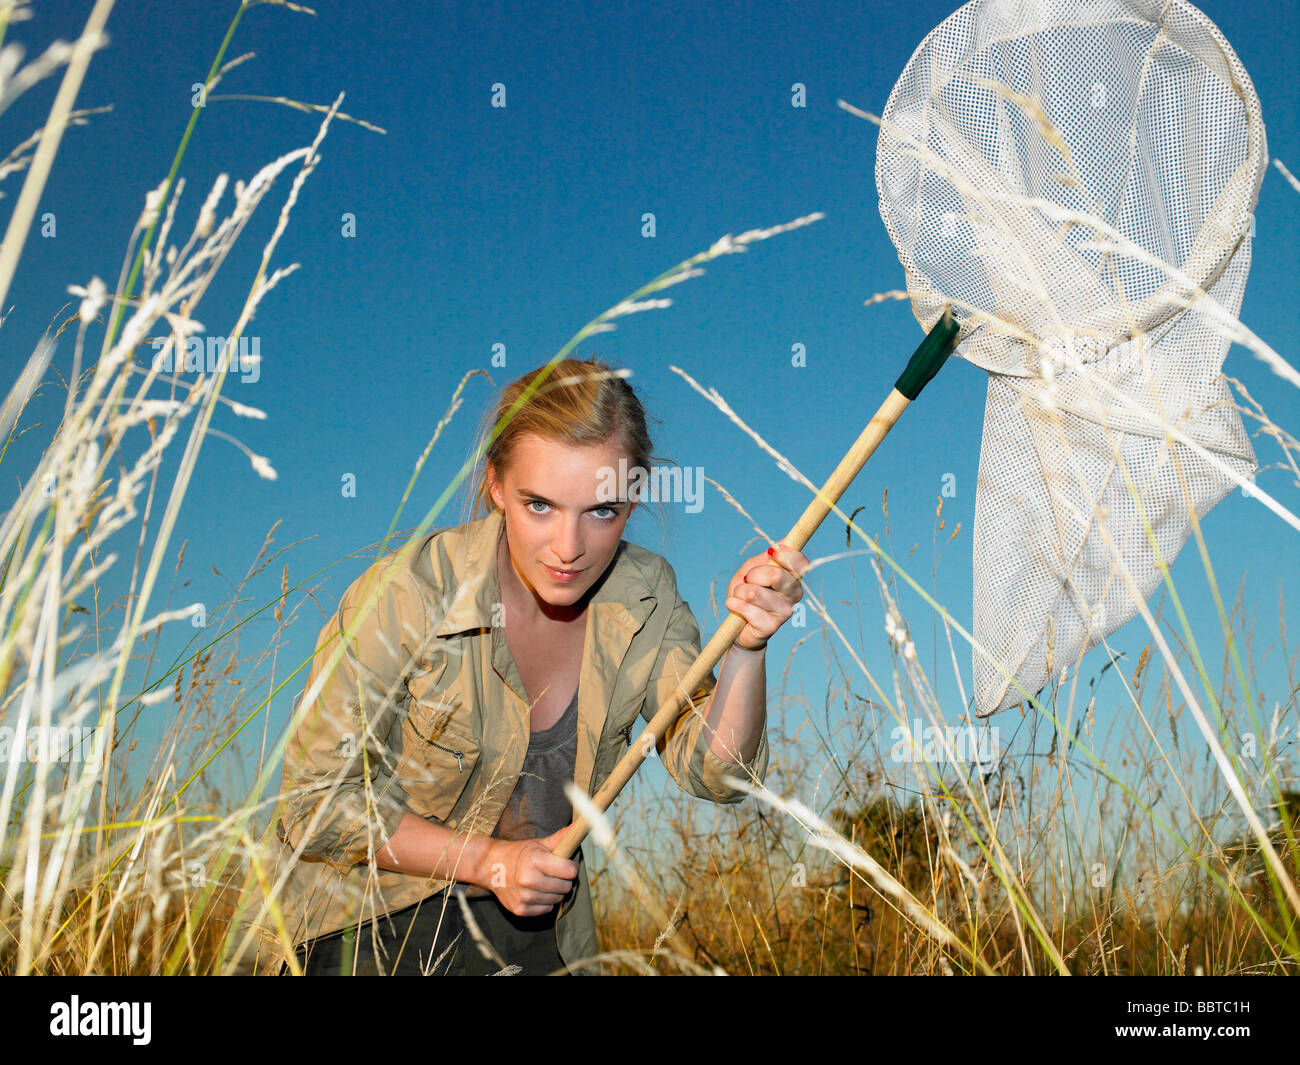 Woman with butterfly net Stock Photo - Alamy